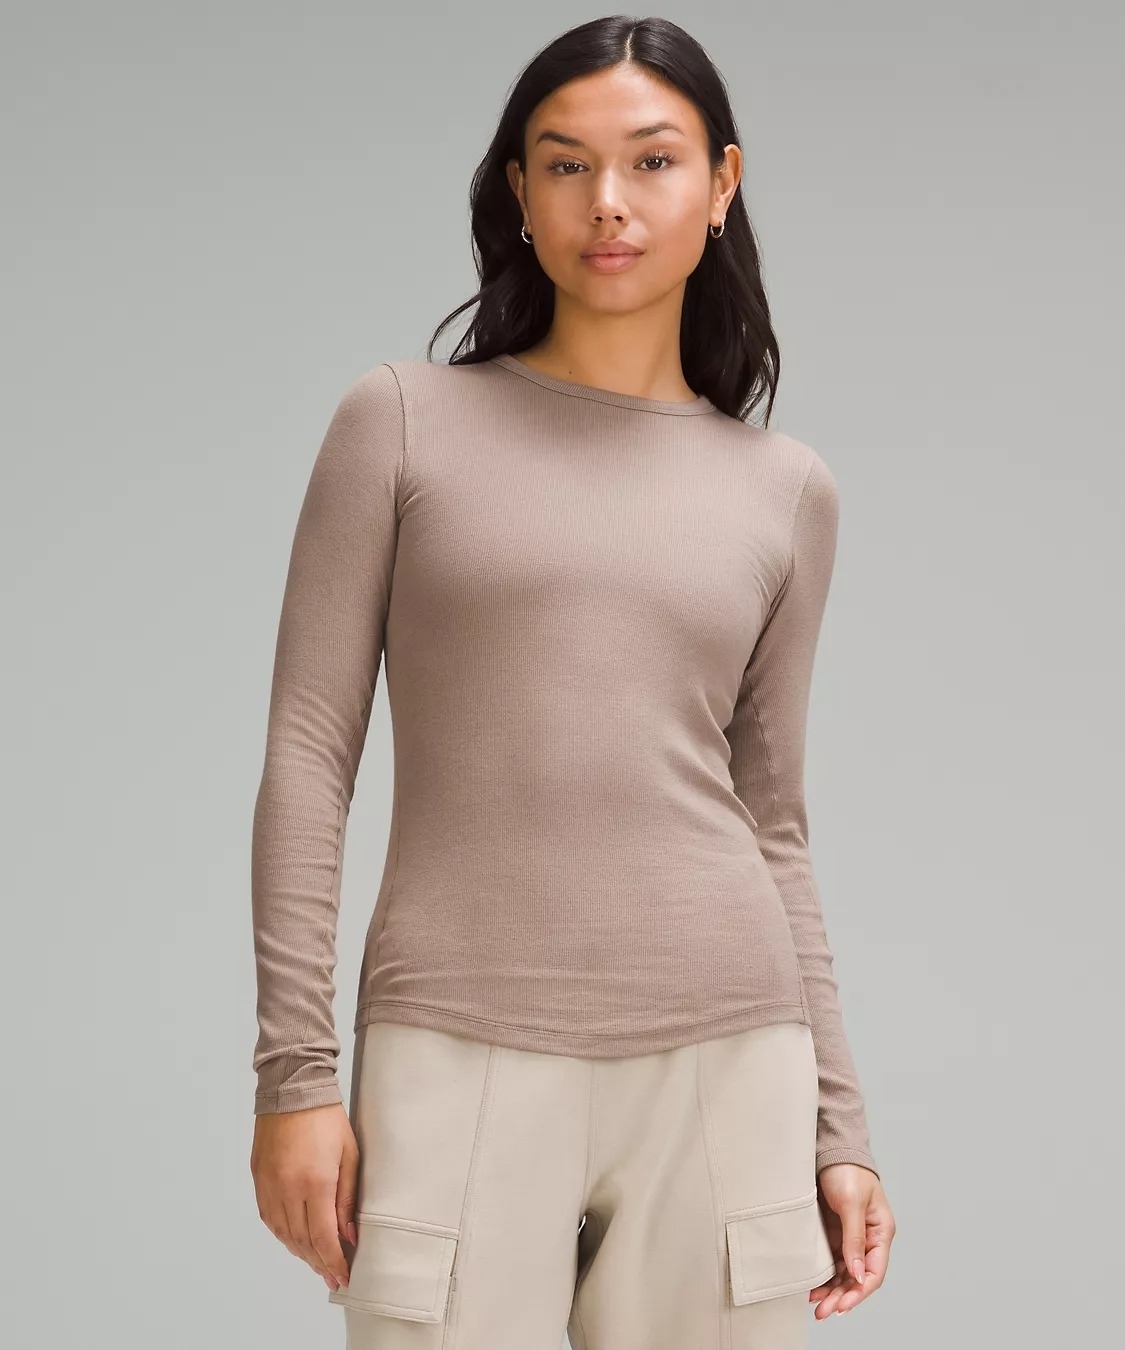 Model wearing ribbed taupe long-sleeve top